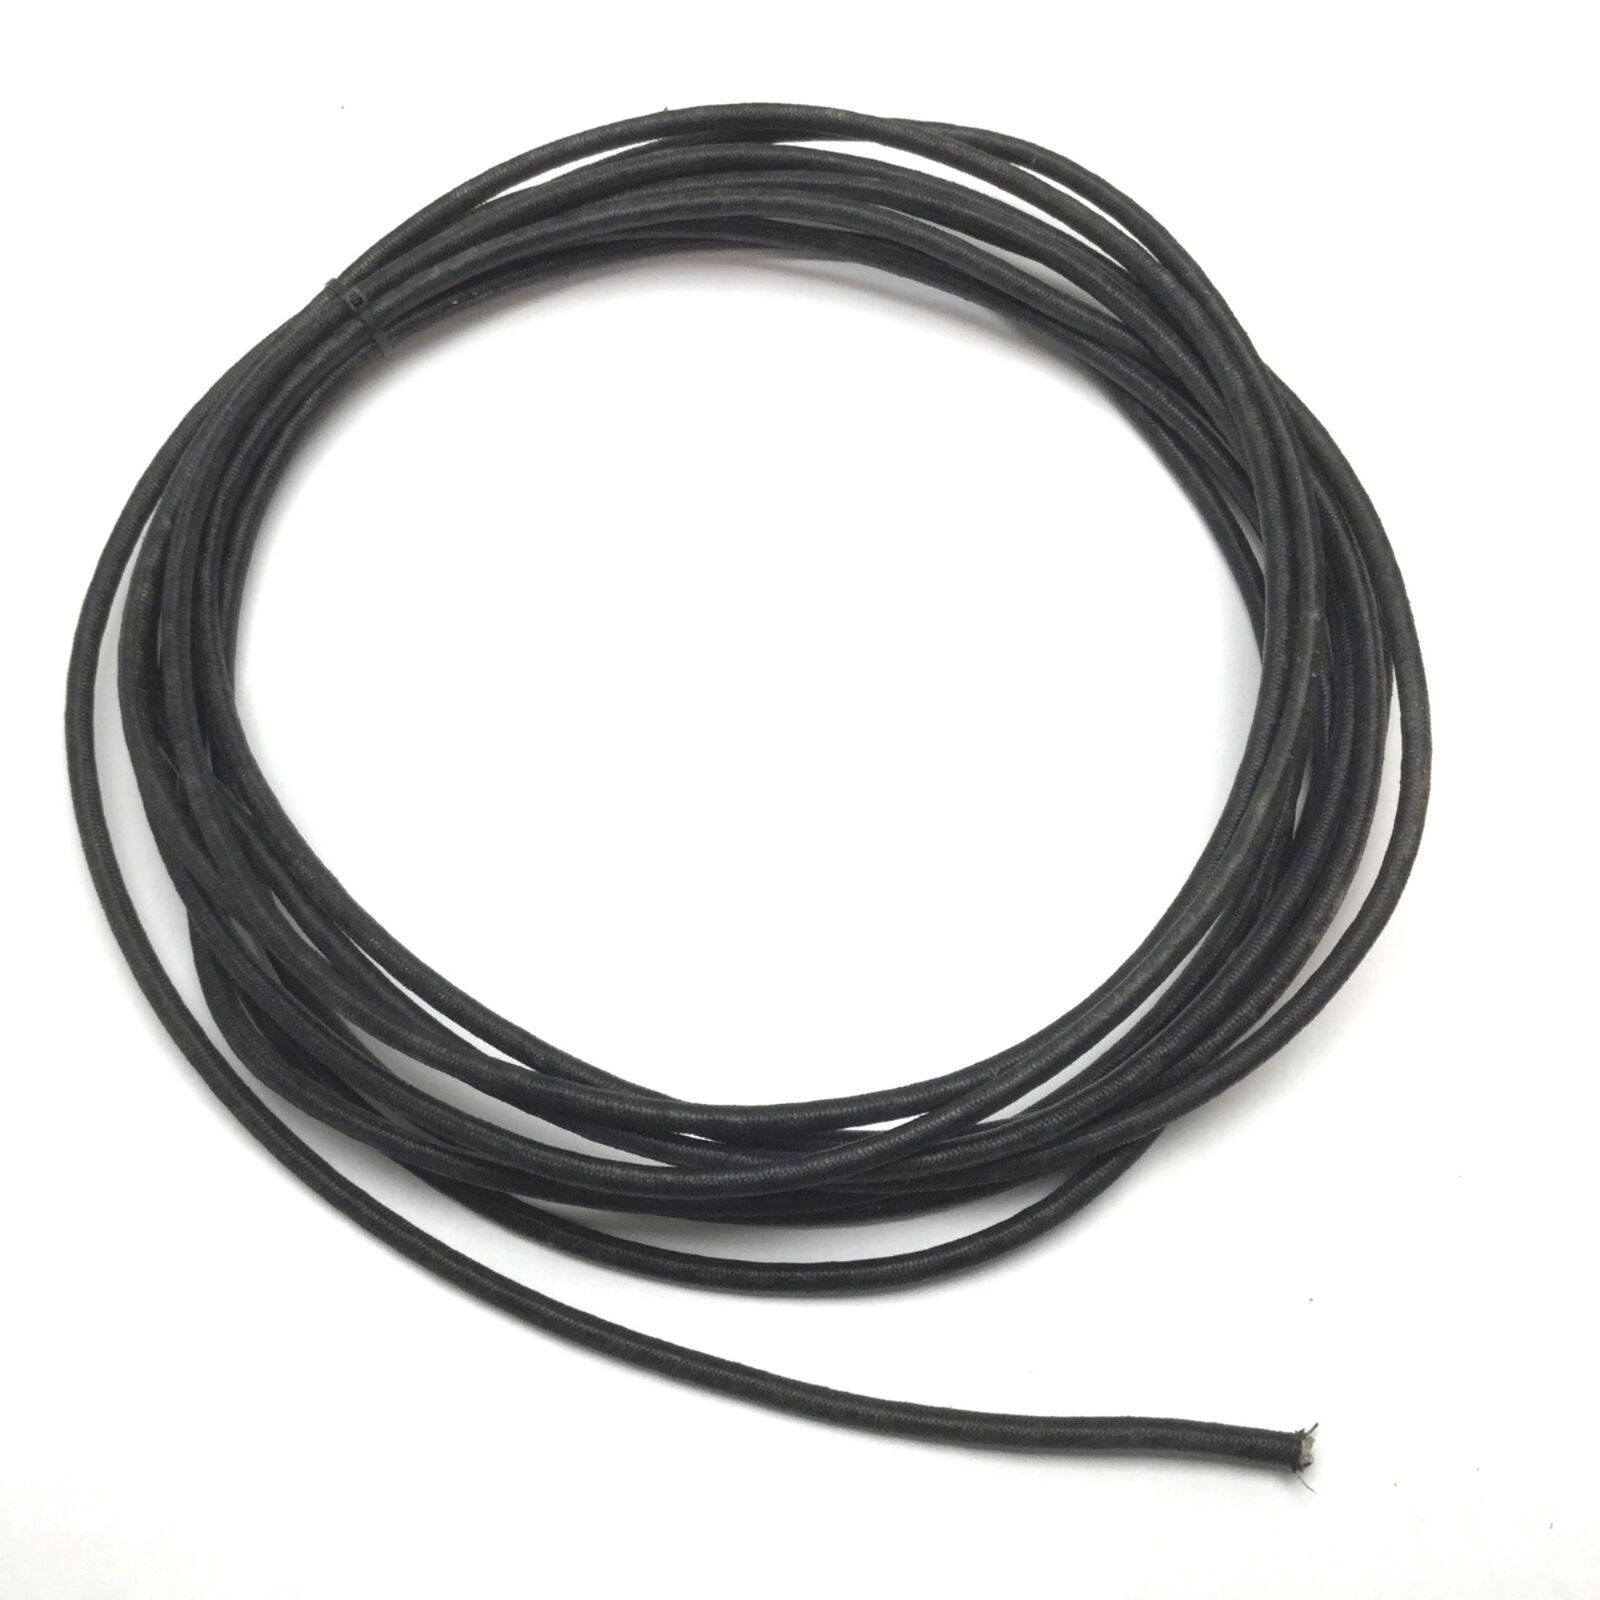 Roll of 30ft of High Temperature Heater Cable, 3-Conductor 16 AWG